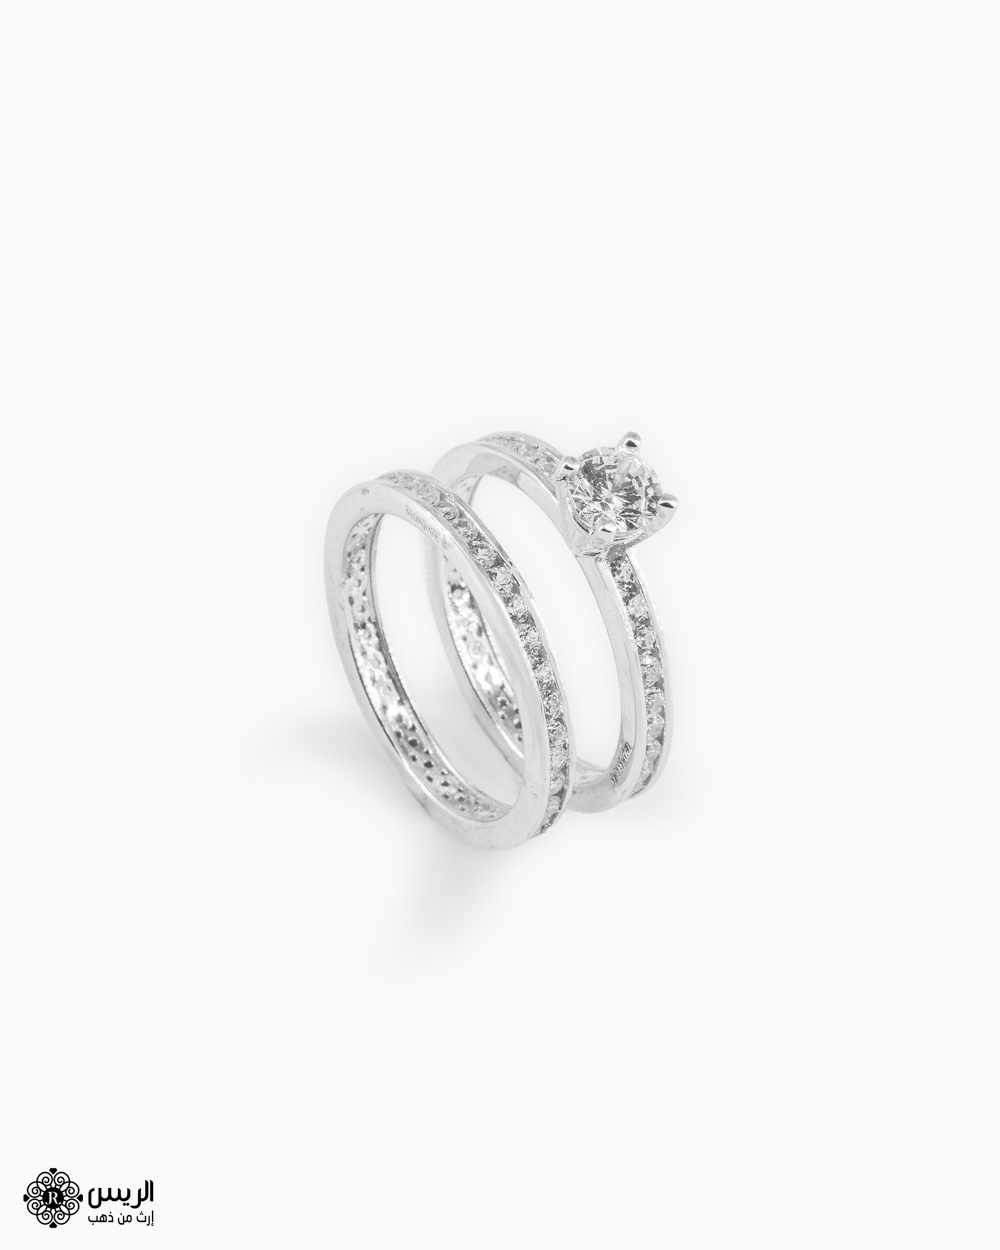 Delicate twin Ring